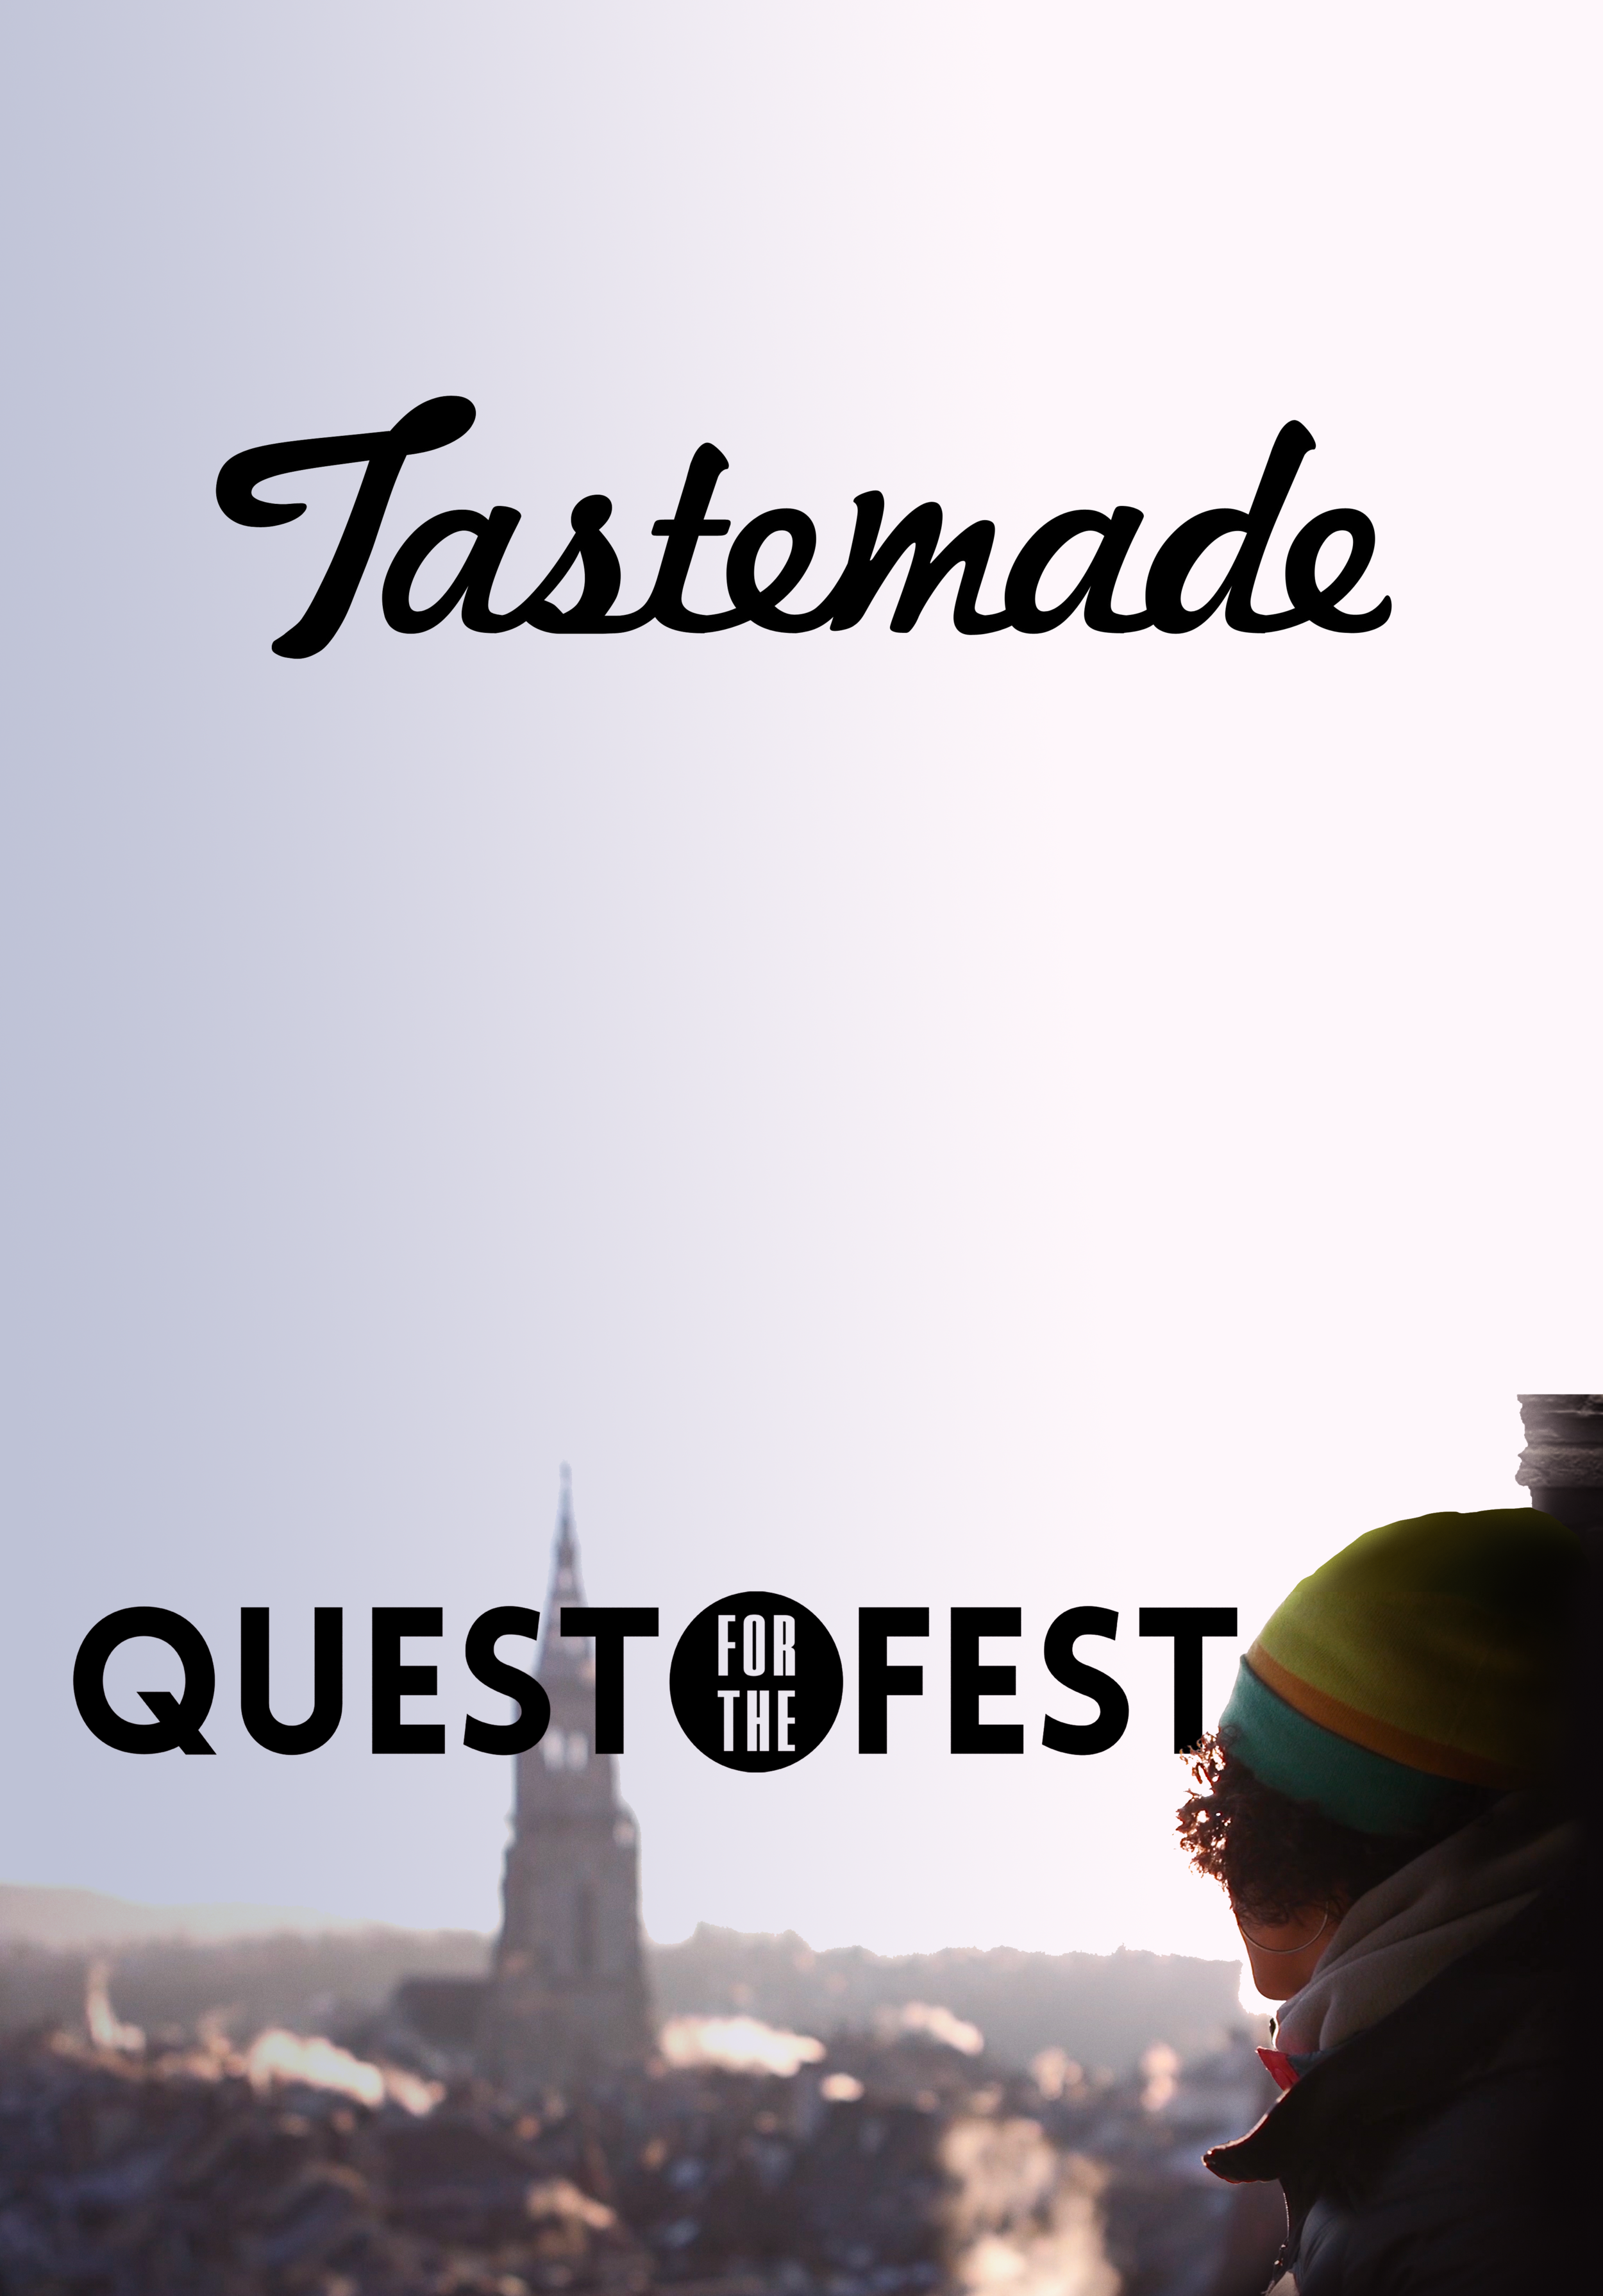 14503ede-quest-for-the-fest_16x92.png